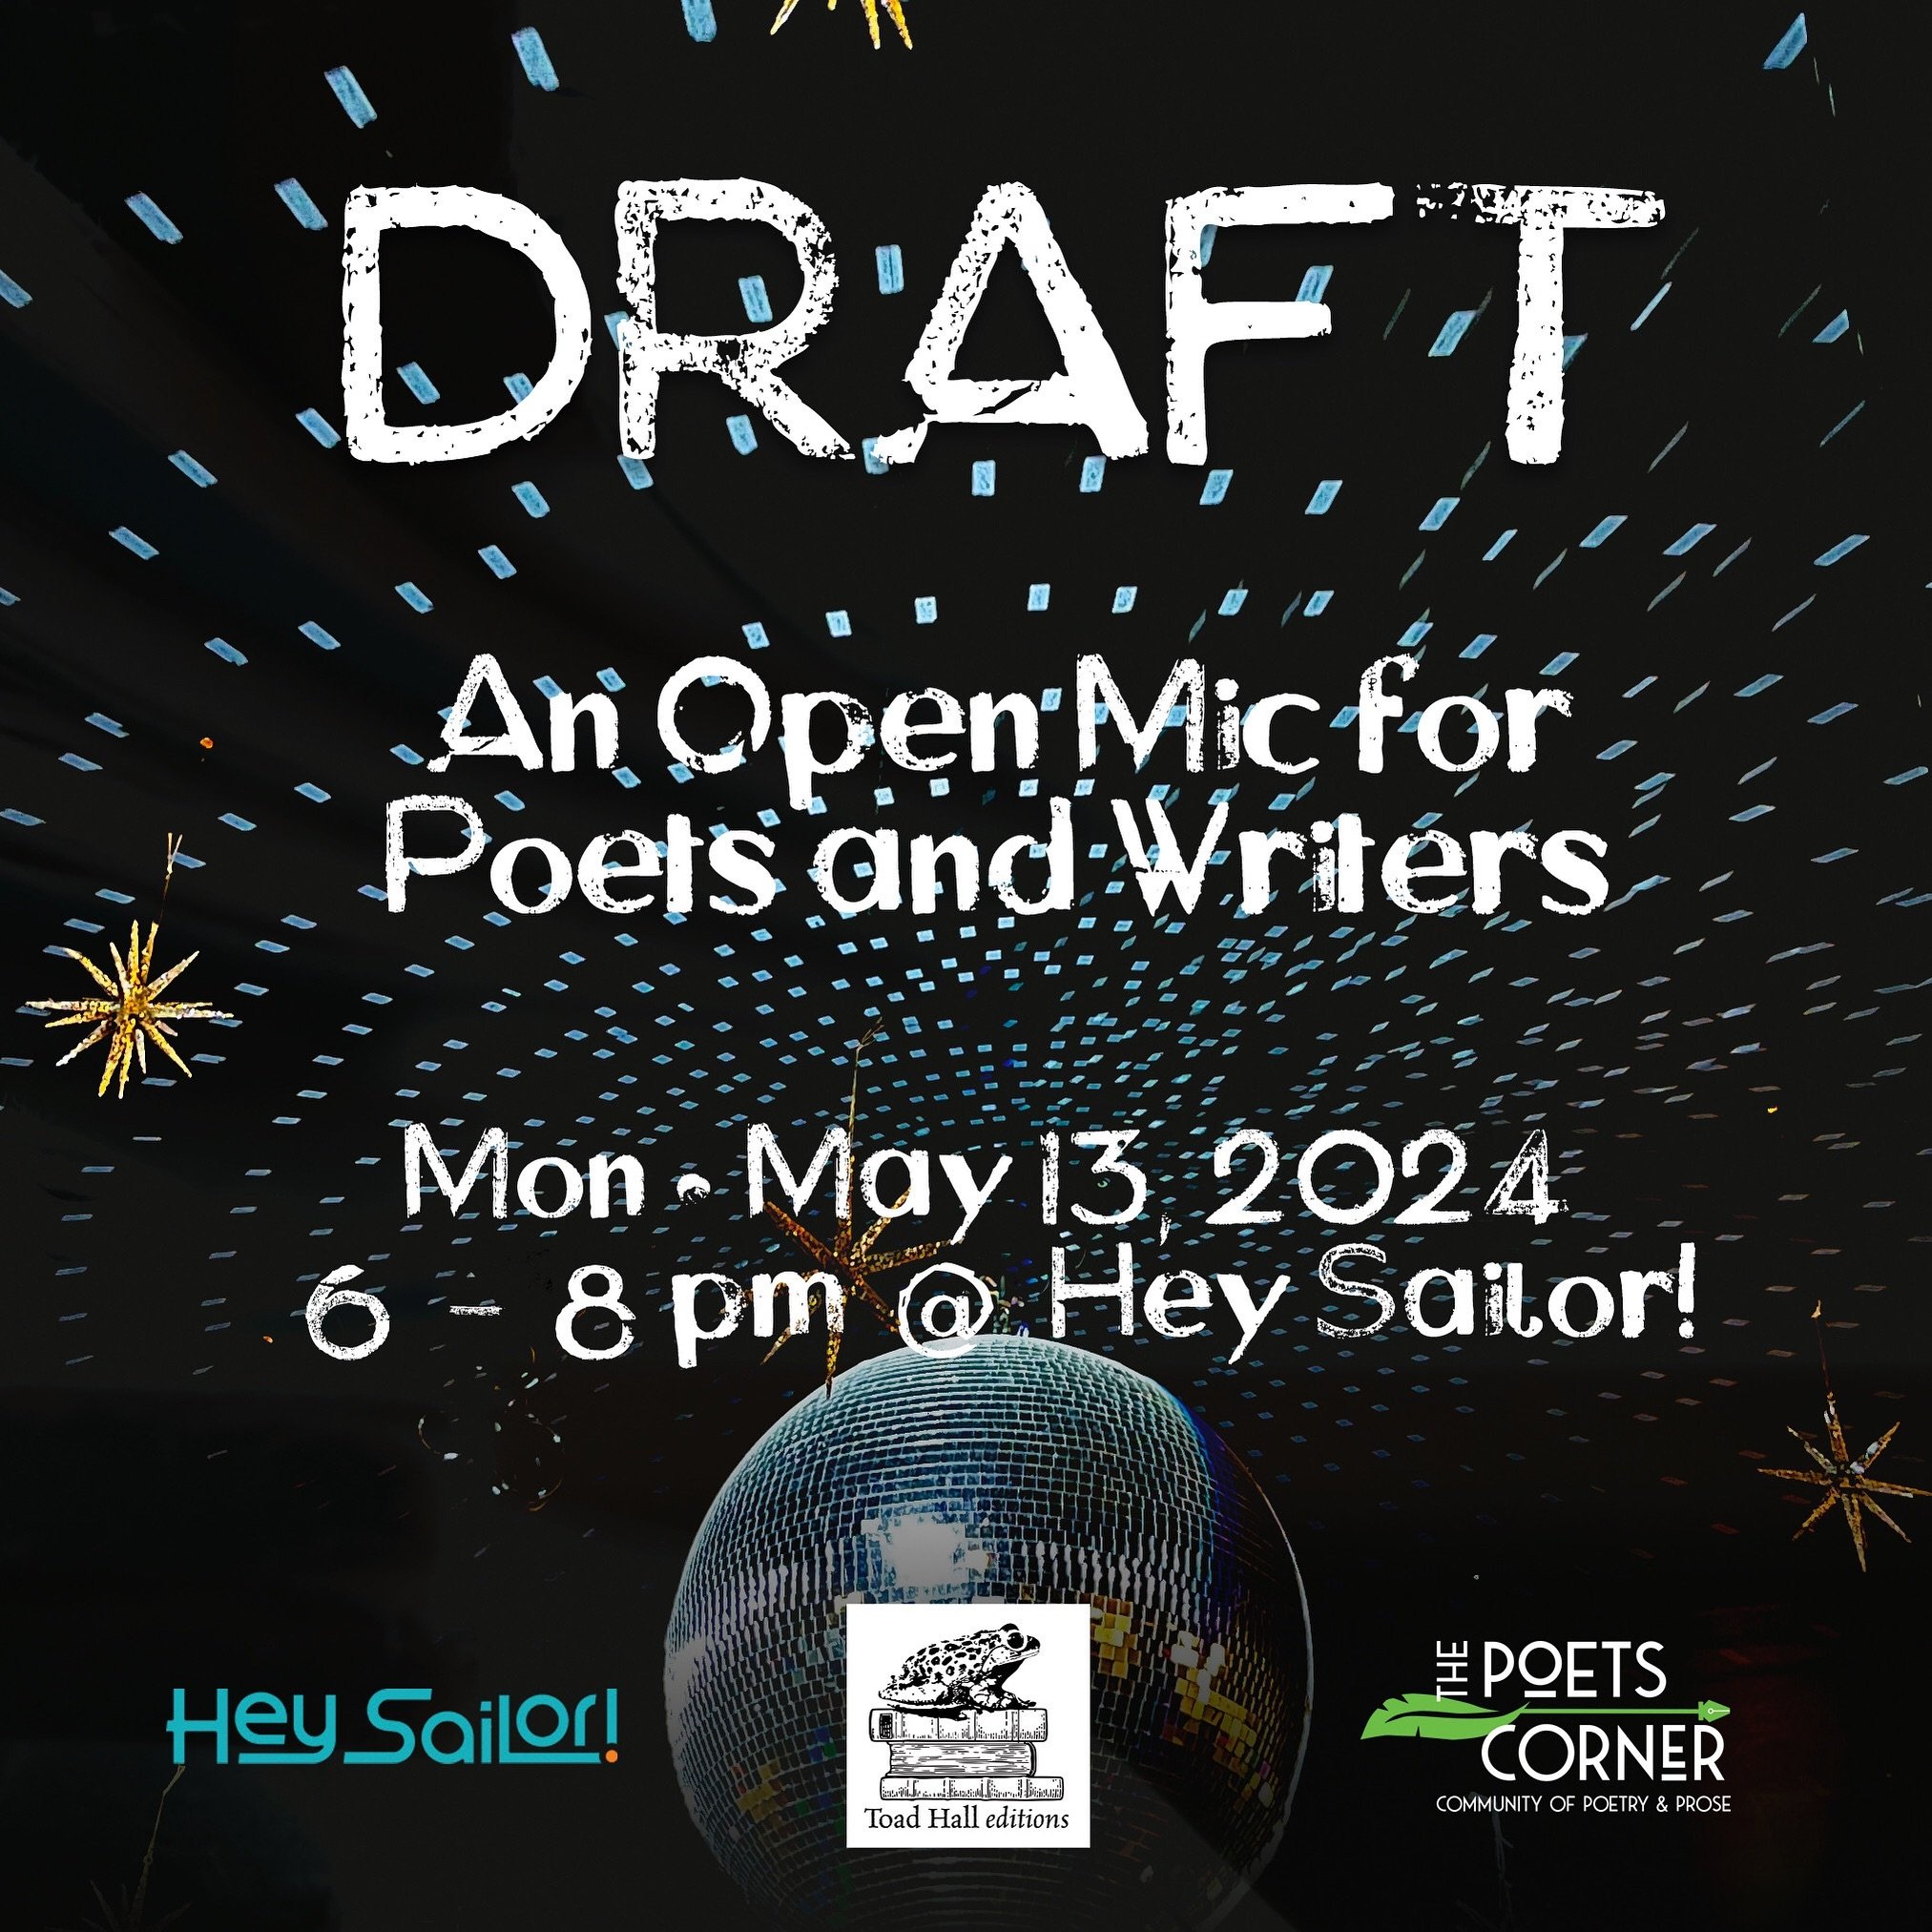 Hey hey hey. It&rsquo;s almost the 2nd Monday again! Bring your works in progress, your poems, your short fiction, your essays, your half-scribbled notes. Join Toad Hall Editions and  @thepoetscornermaine on Monday night March 13 from 6-8pm for Draft